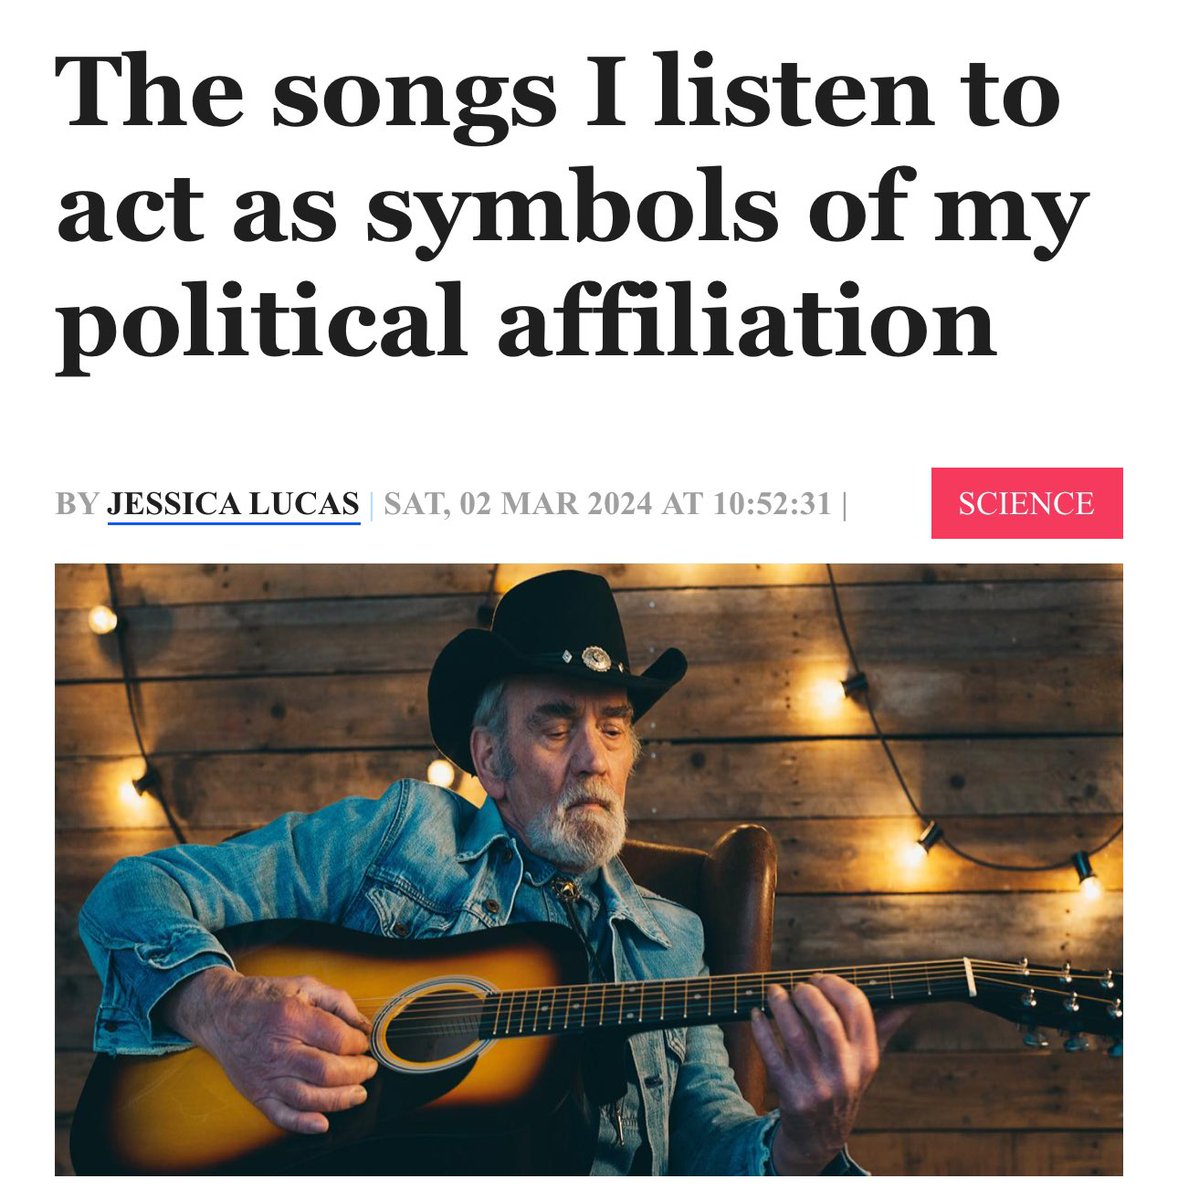 #Polarization is now evident in one’s music #genre tastes. #Republicans and #conservatives seem to prefer #countrymusic, while #Democrats appear to be more attracted to #classicalrock or #alternative genres. 

sciencedirect.com/science/articl…